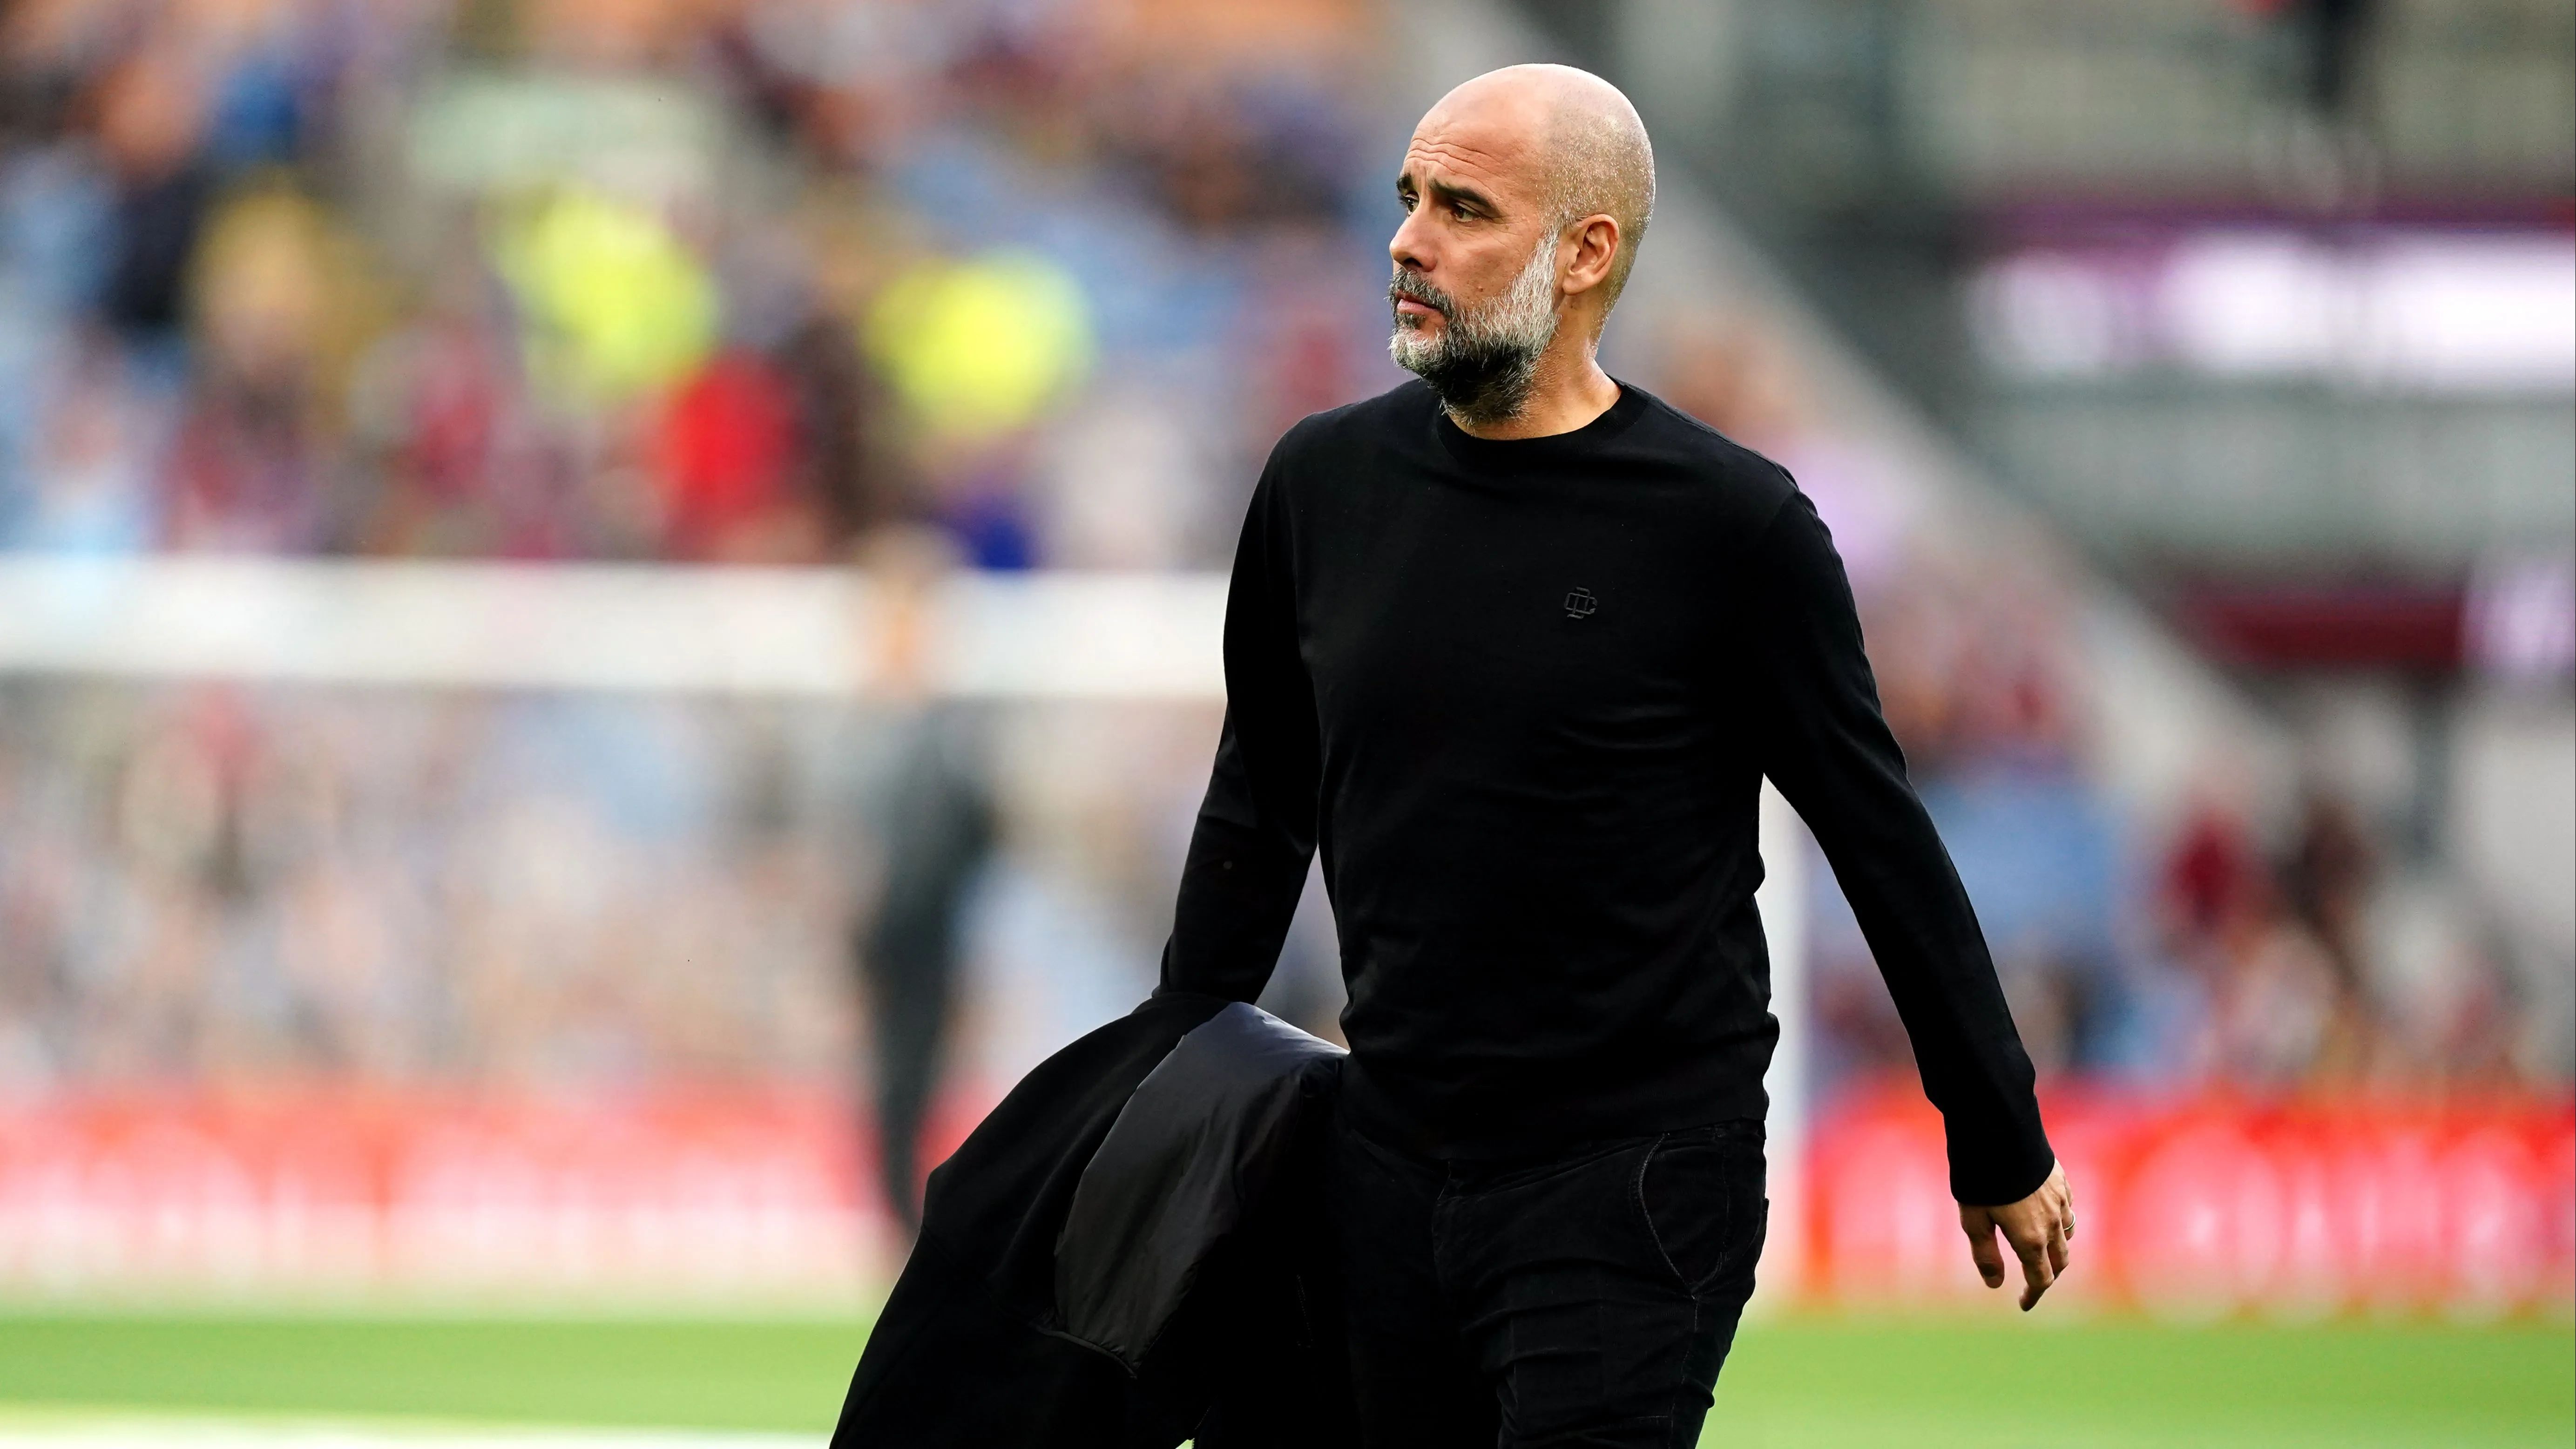 Pep Guardiola Provides Defensive Injury Update Prior to Real Madrid Match